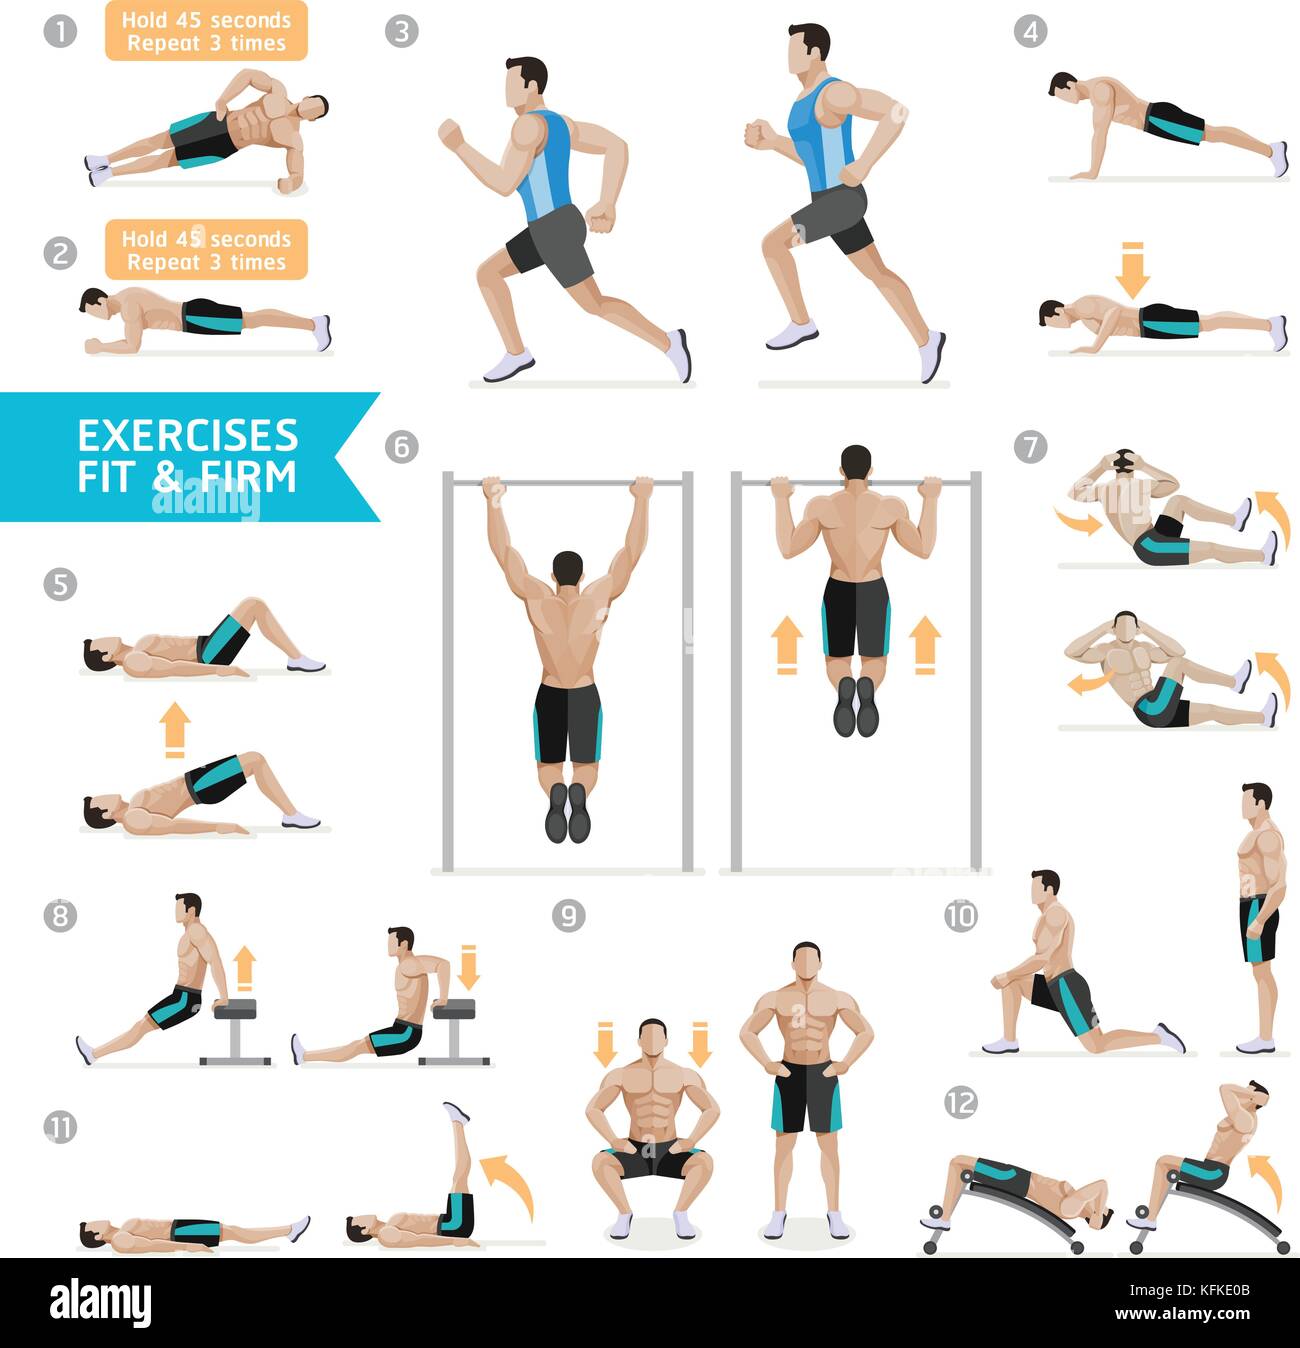 Vive Dumbbell Workout Poster Home Gym Exercise For Upper Lower Full Body Laminated Bodyweight